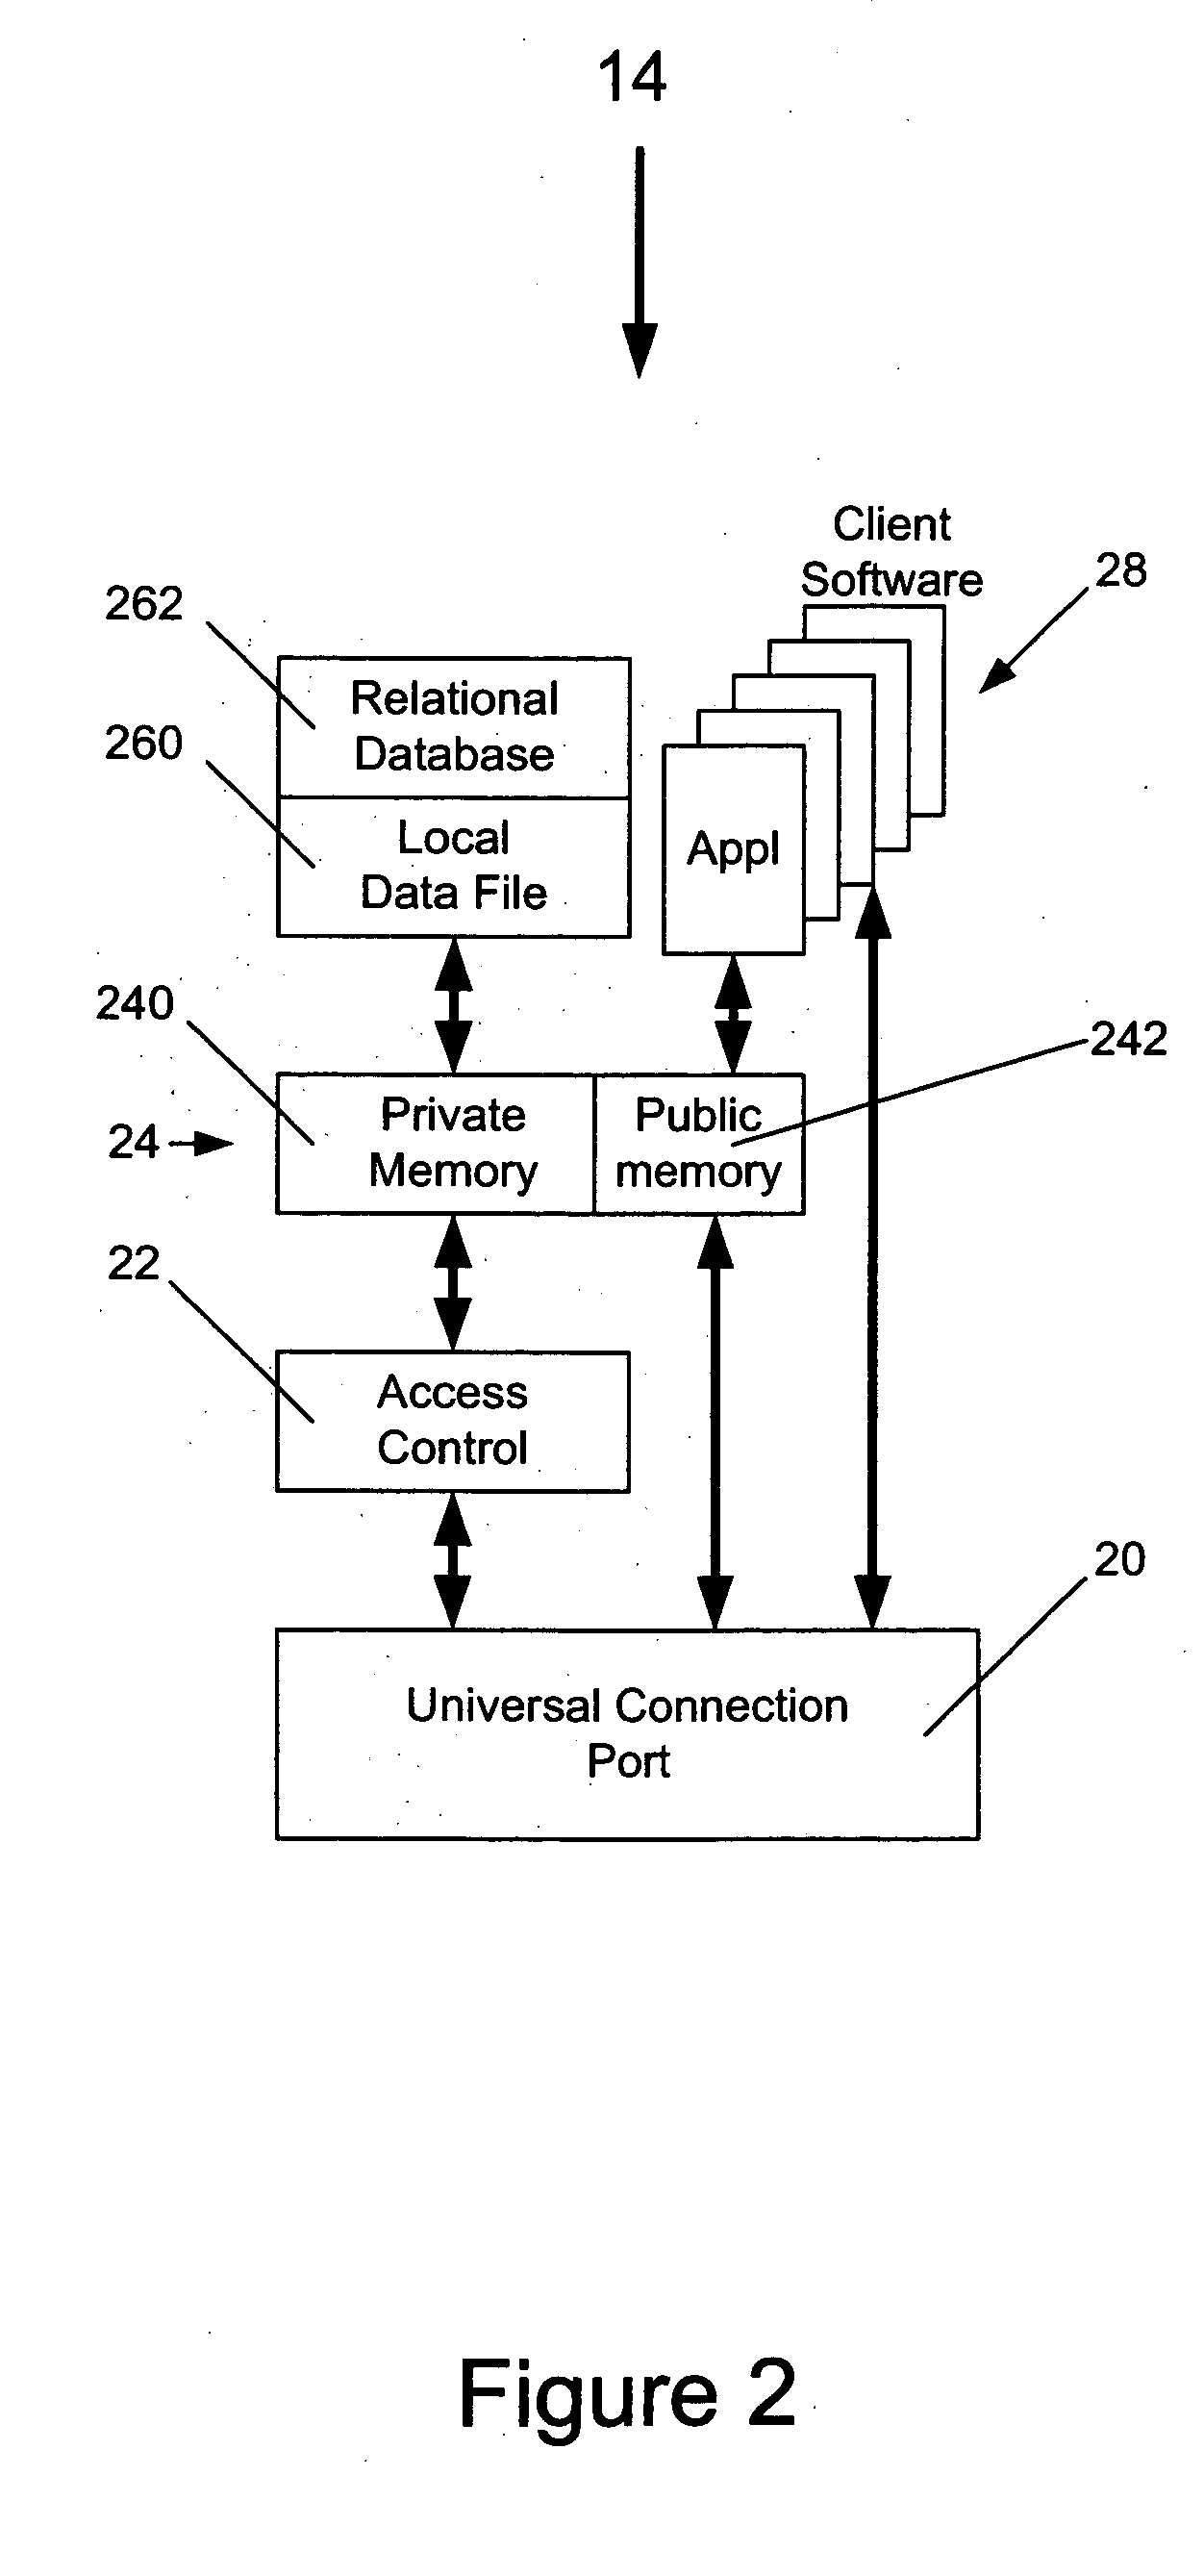 Mobile memory device with integrated applications and online services